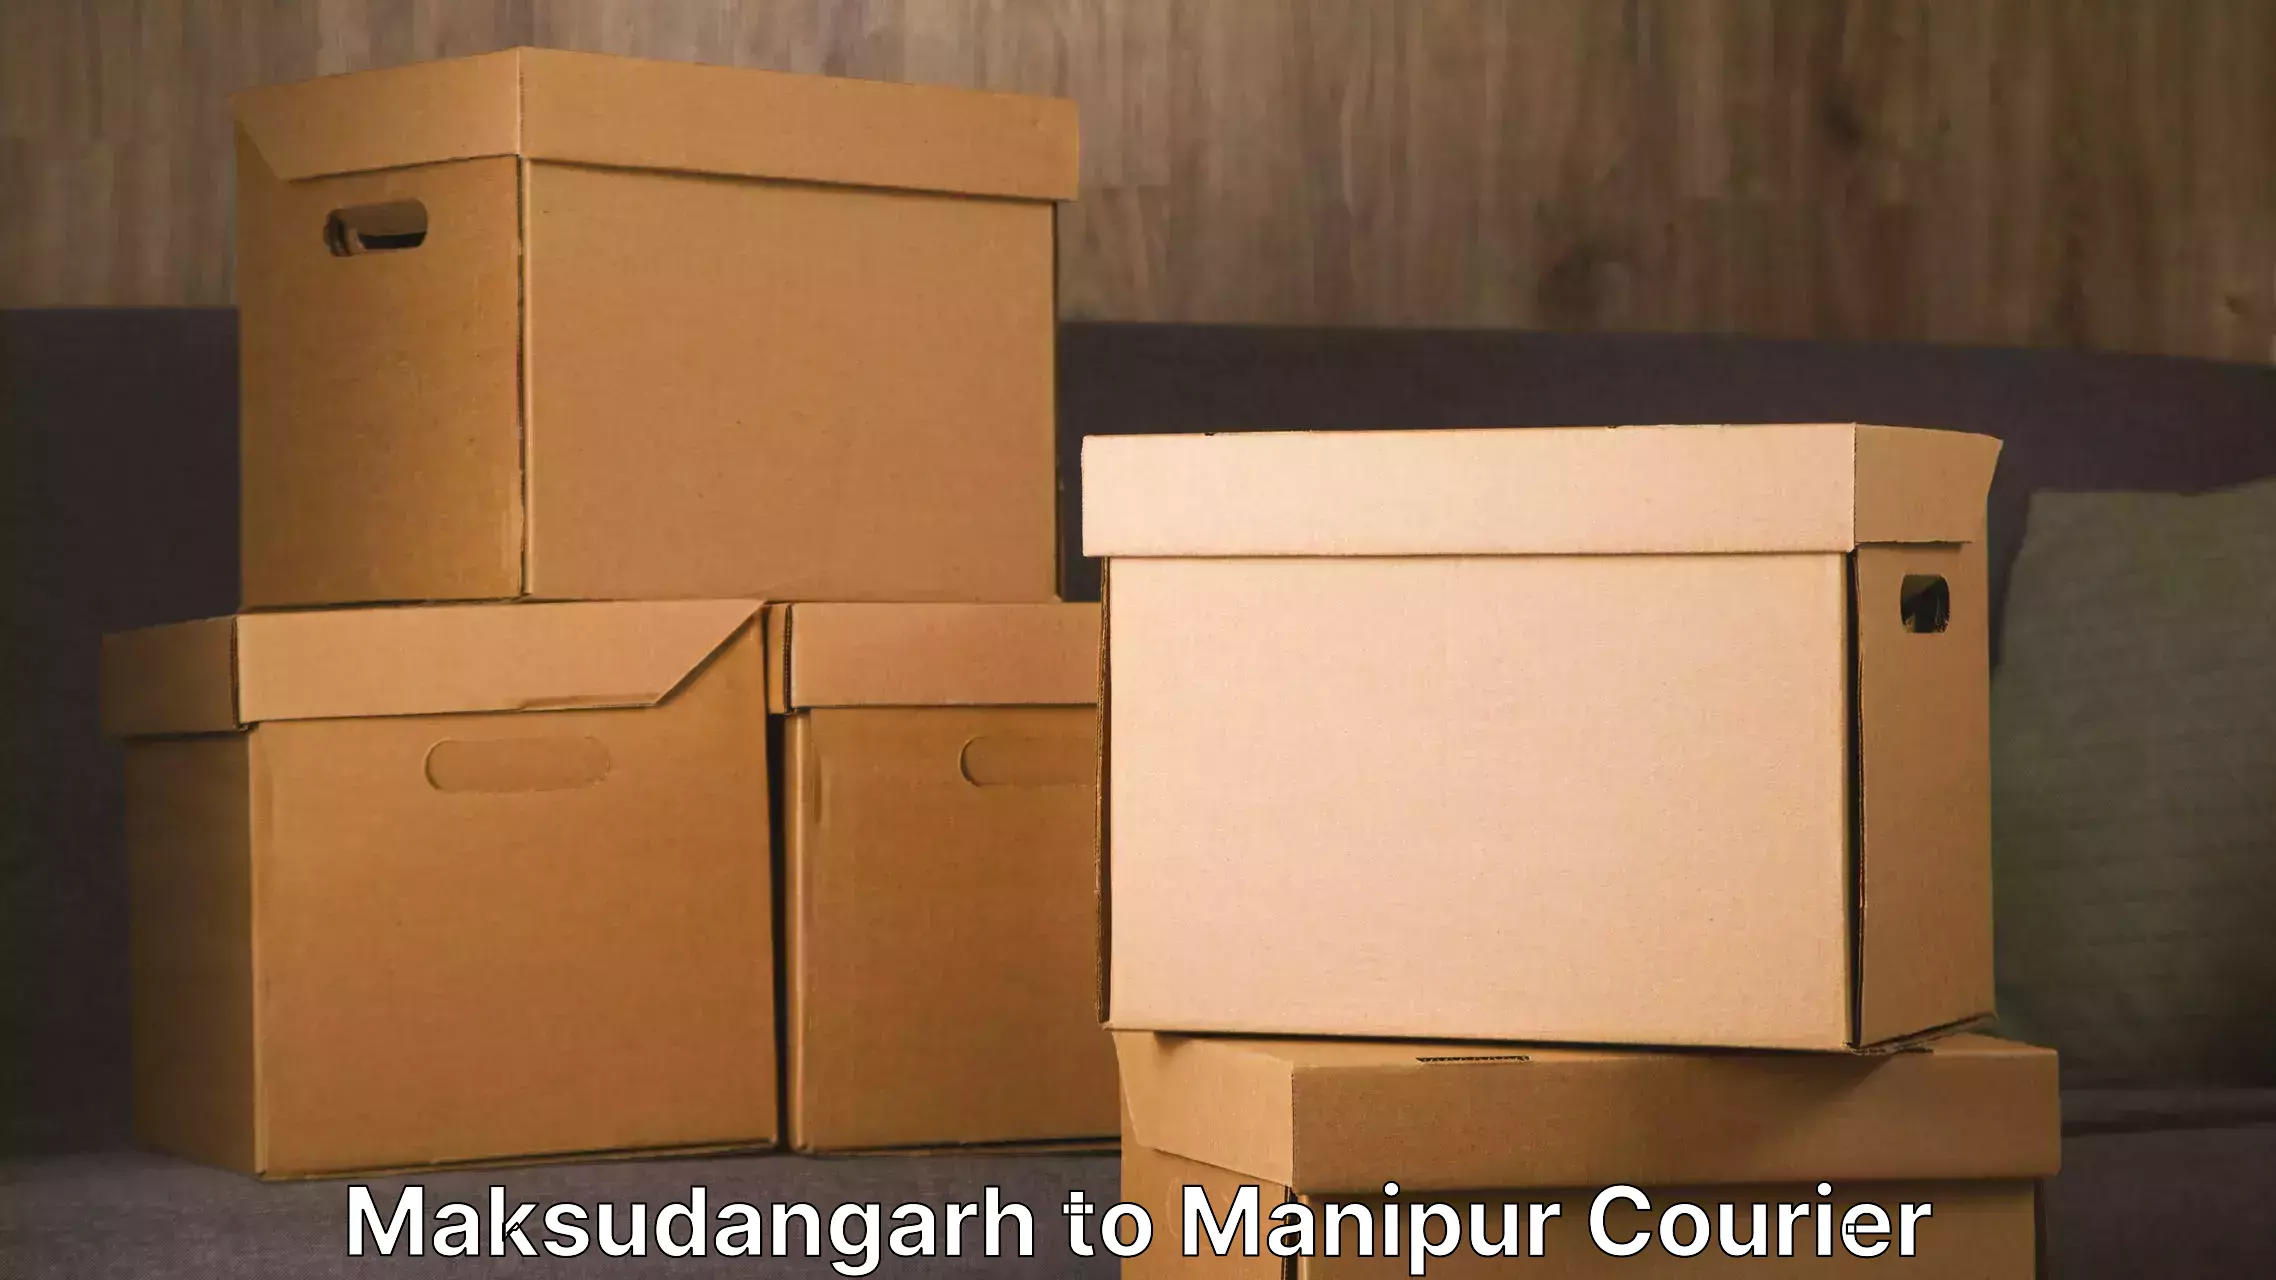 Home goods moving company Maksudangarh to Manipur